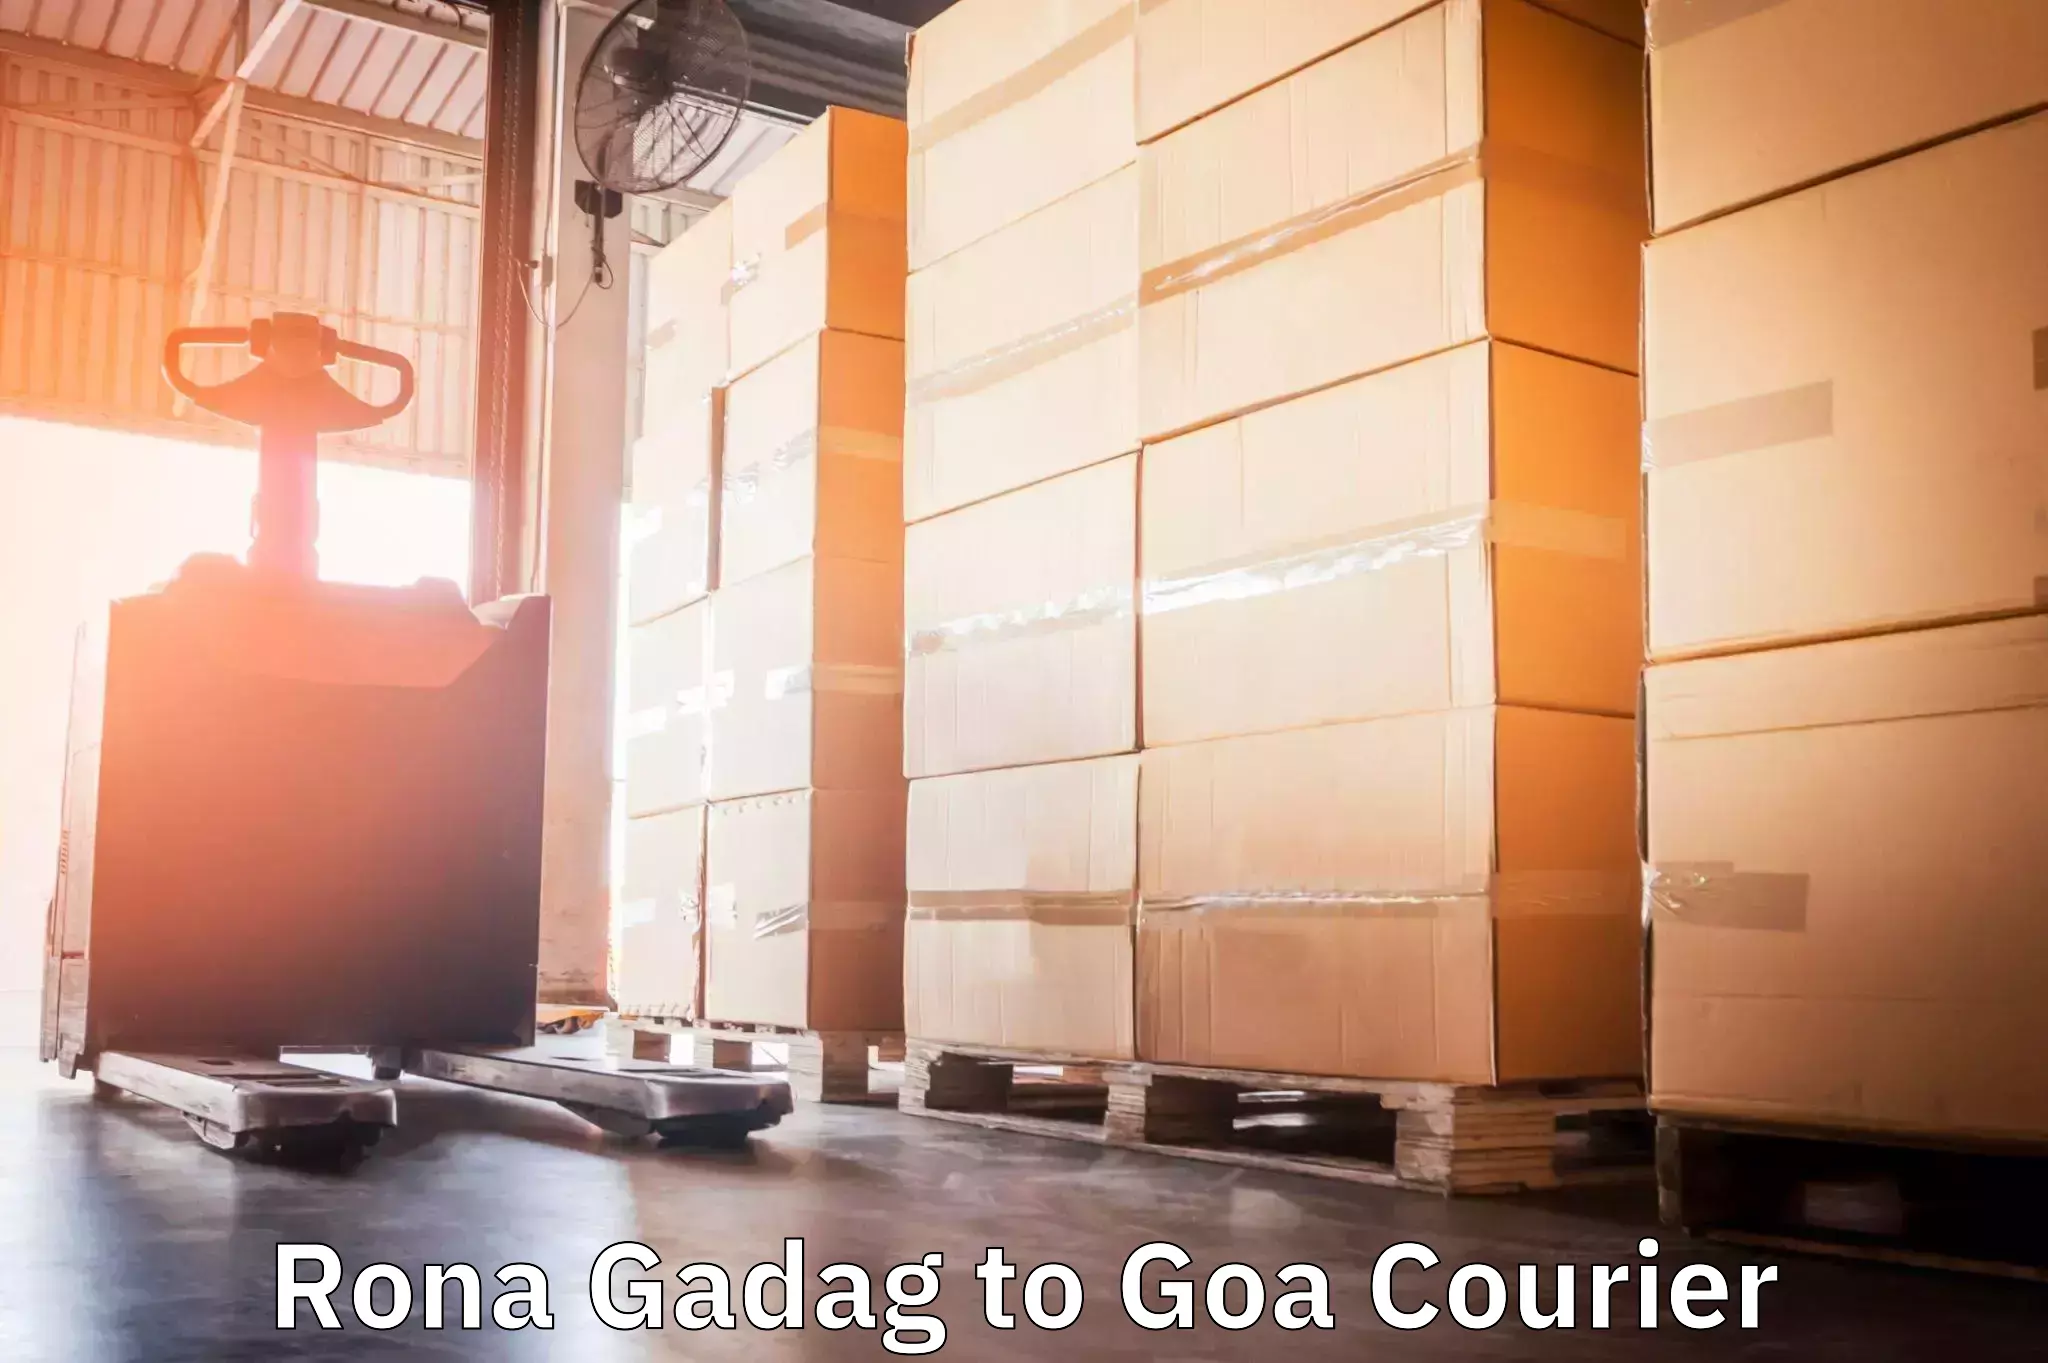 State-of-the-art courier technology in Rona Gadag to Goa University